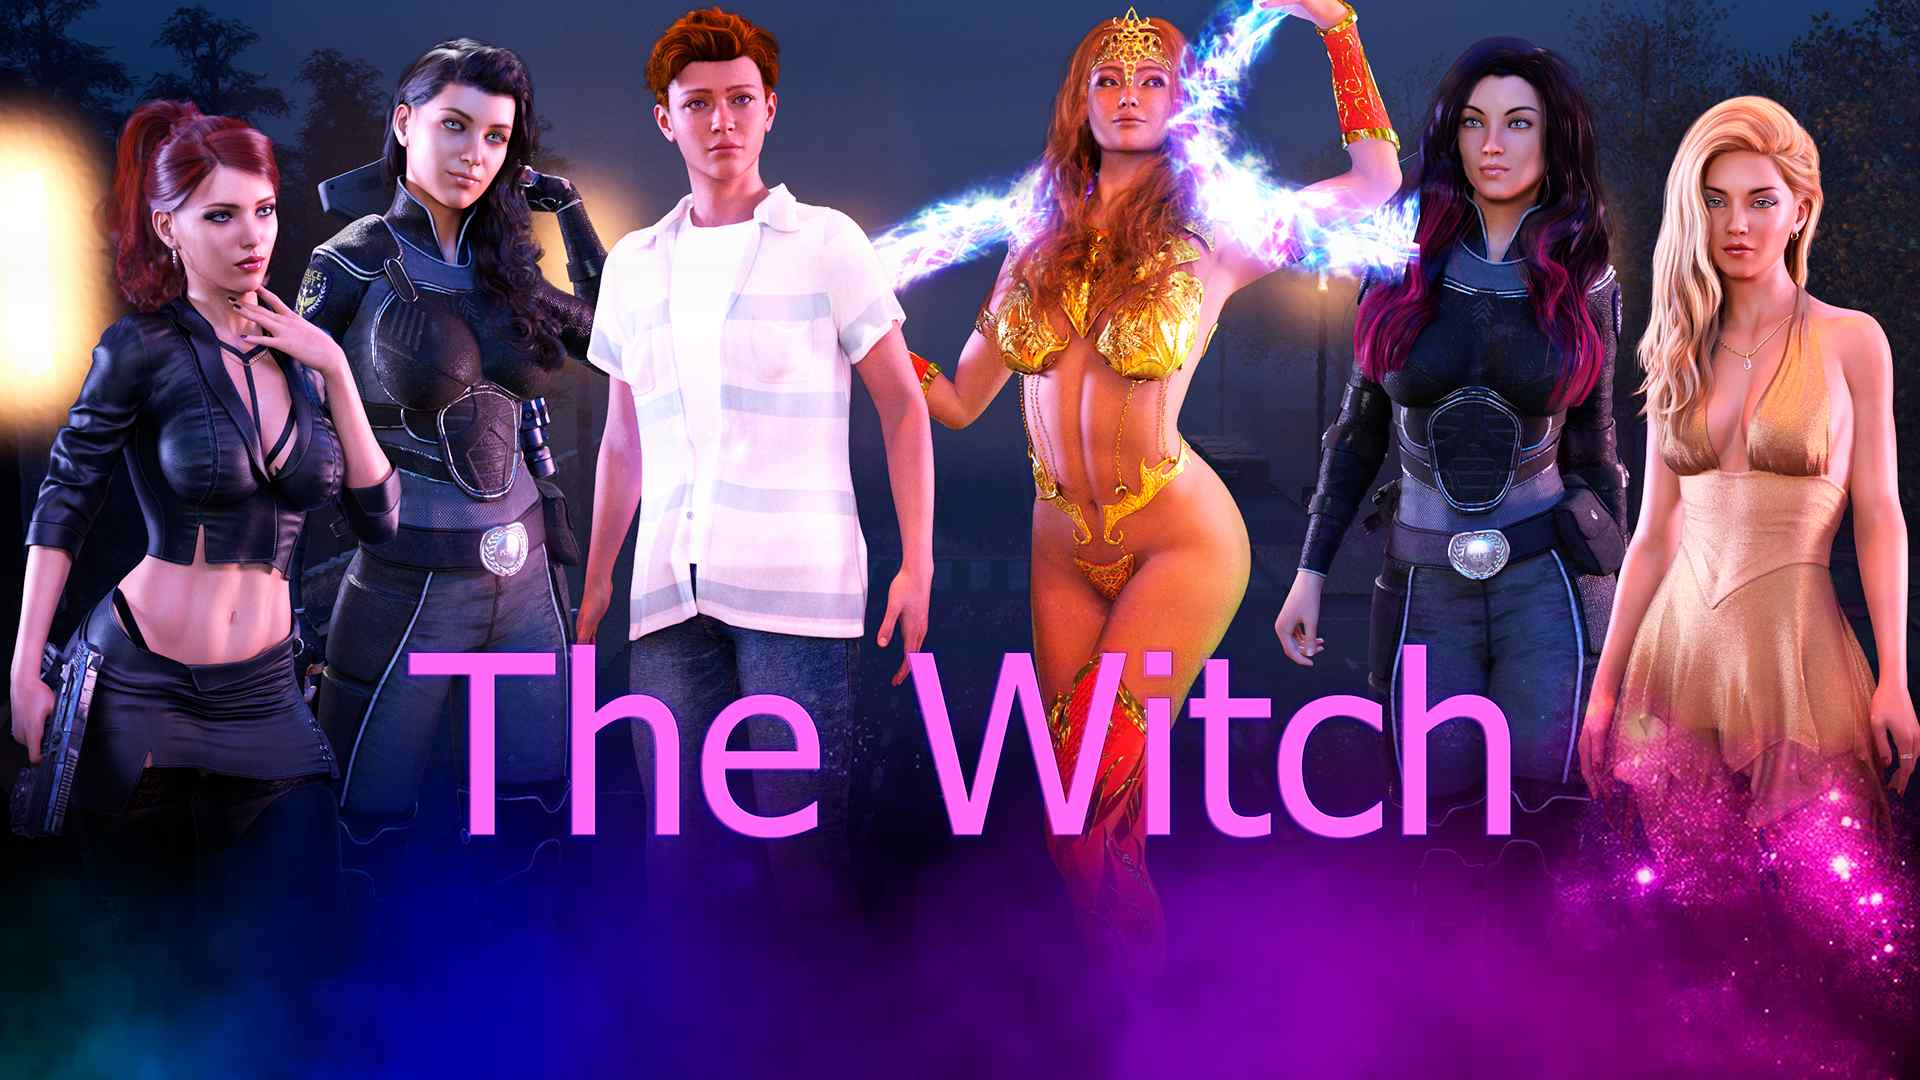 The Witch [Allion_Ell] Adult xxx Game Download